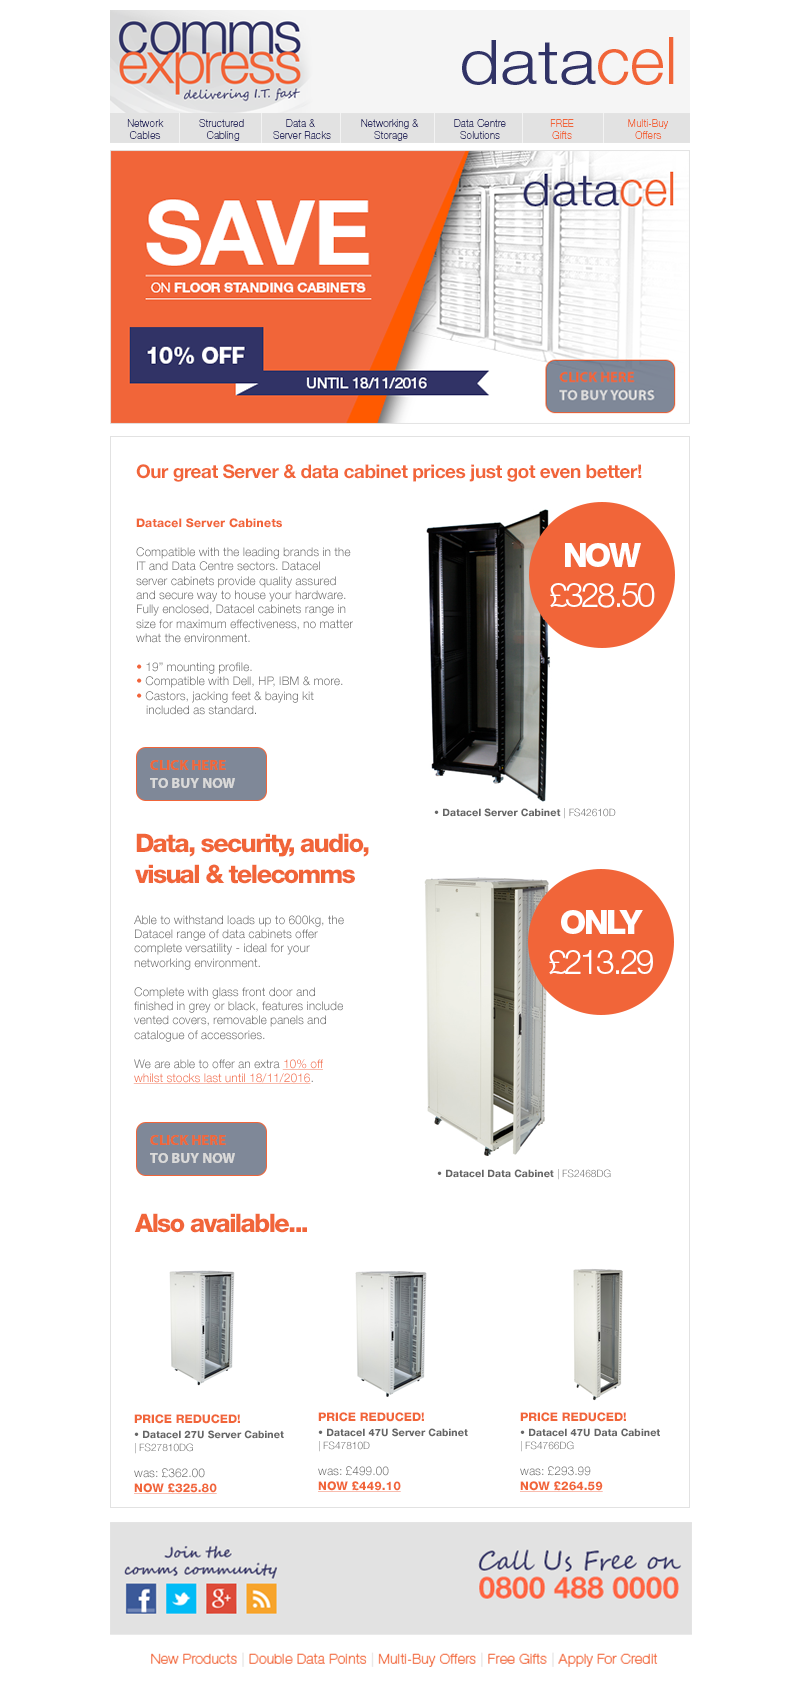 SAVE on Datacel Cabinets Whilst Stocks Last